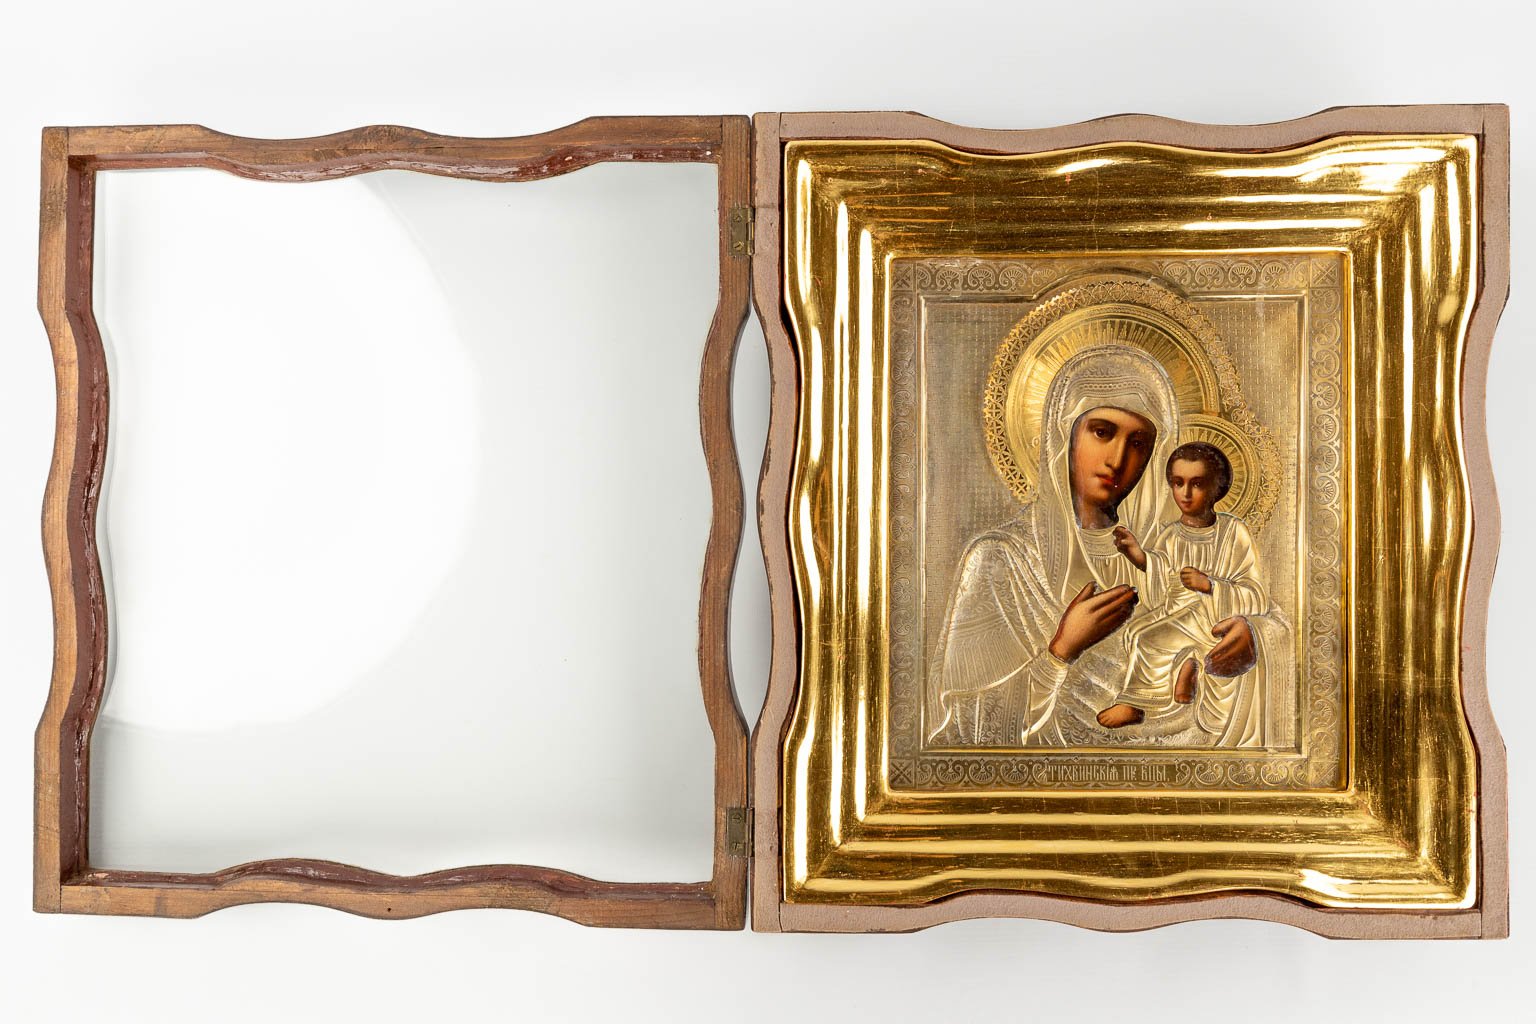 An antique Icon, an Image of Madonna with a child, silver overlay. Saint Petersburg, 19th C. (W: 40,5 x H: 45 cm)